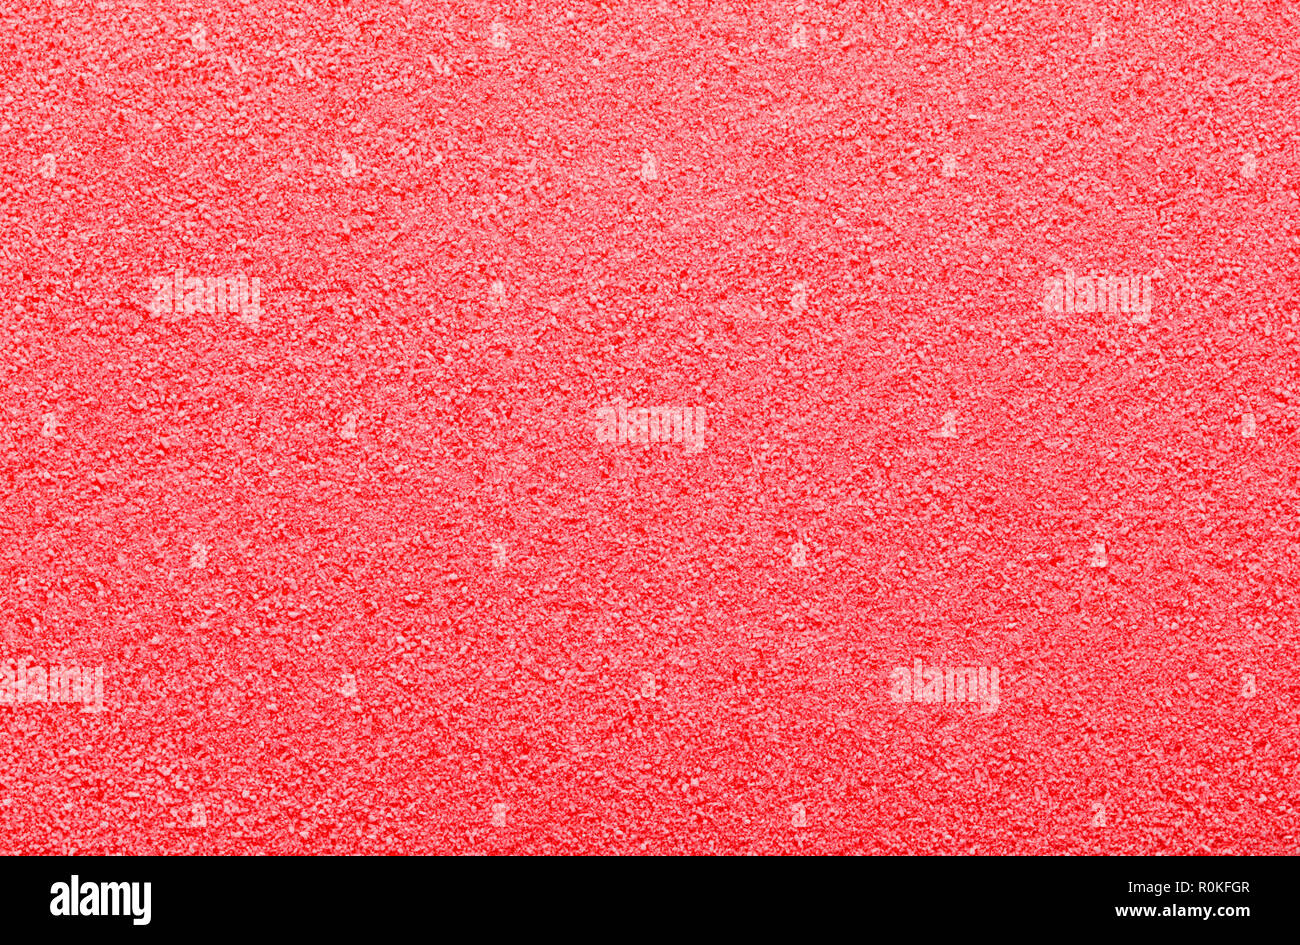 Flat Pile of Red Sugar Grain Textured Background. Stock Photo